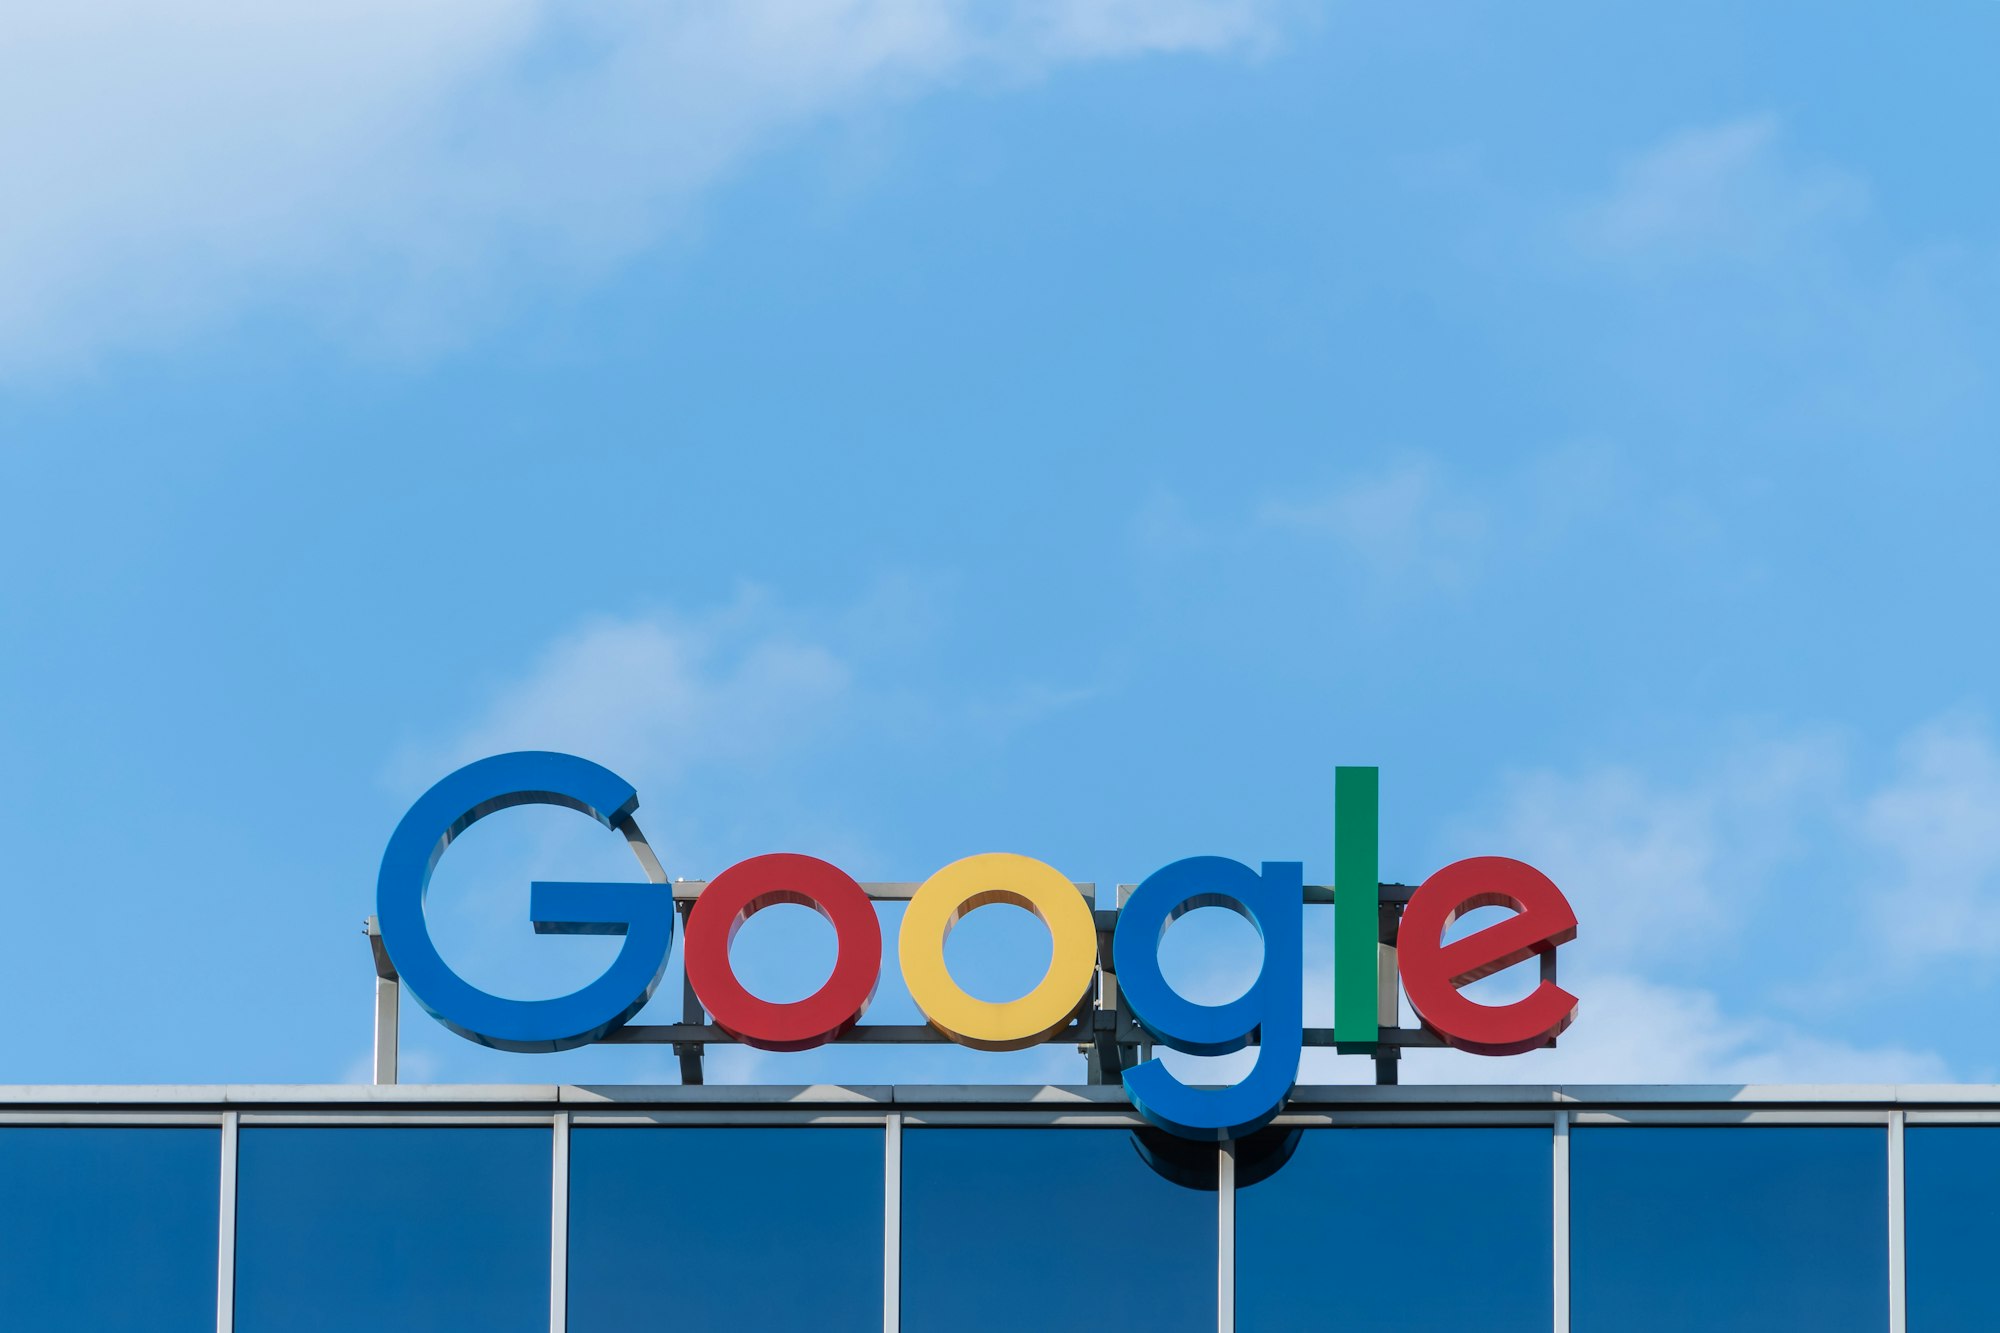 Google’s parent company Alphabet lays off 6% of its workforce, totaling 12,000 jobs